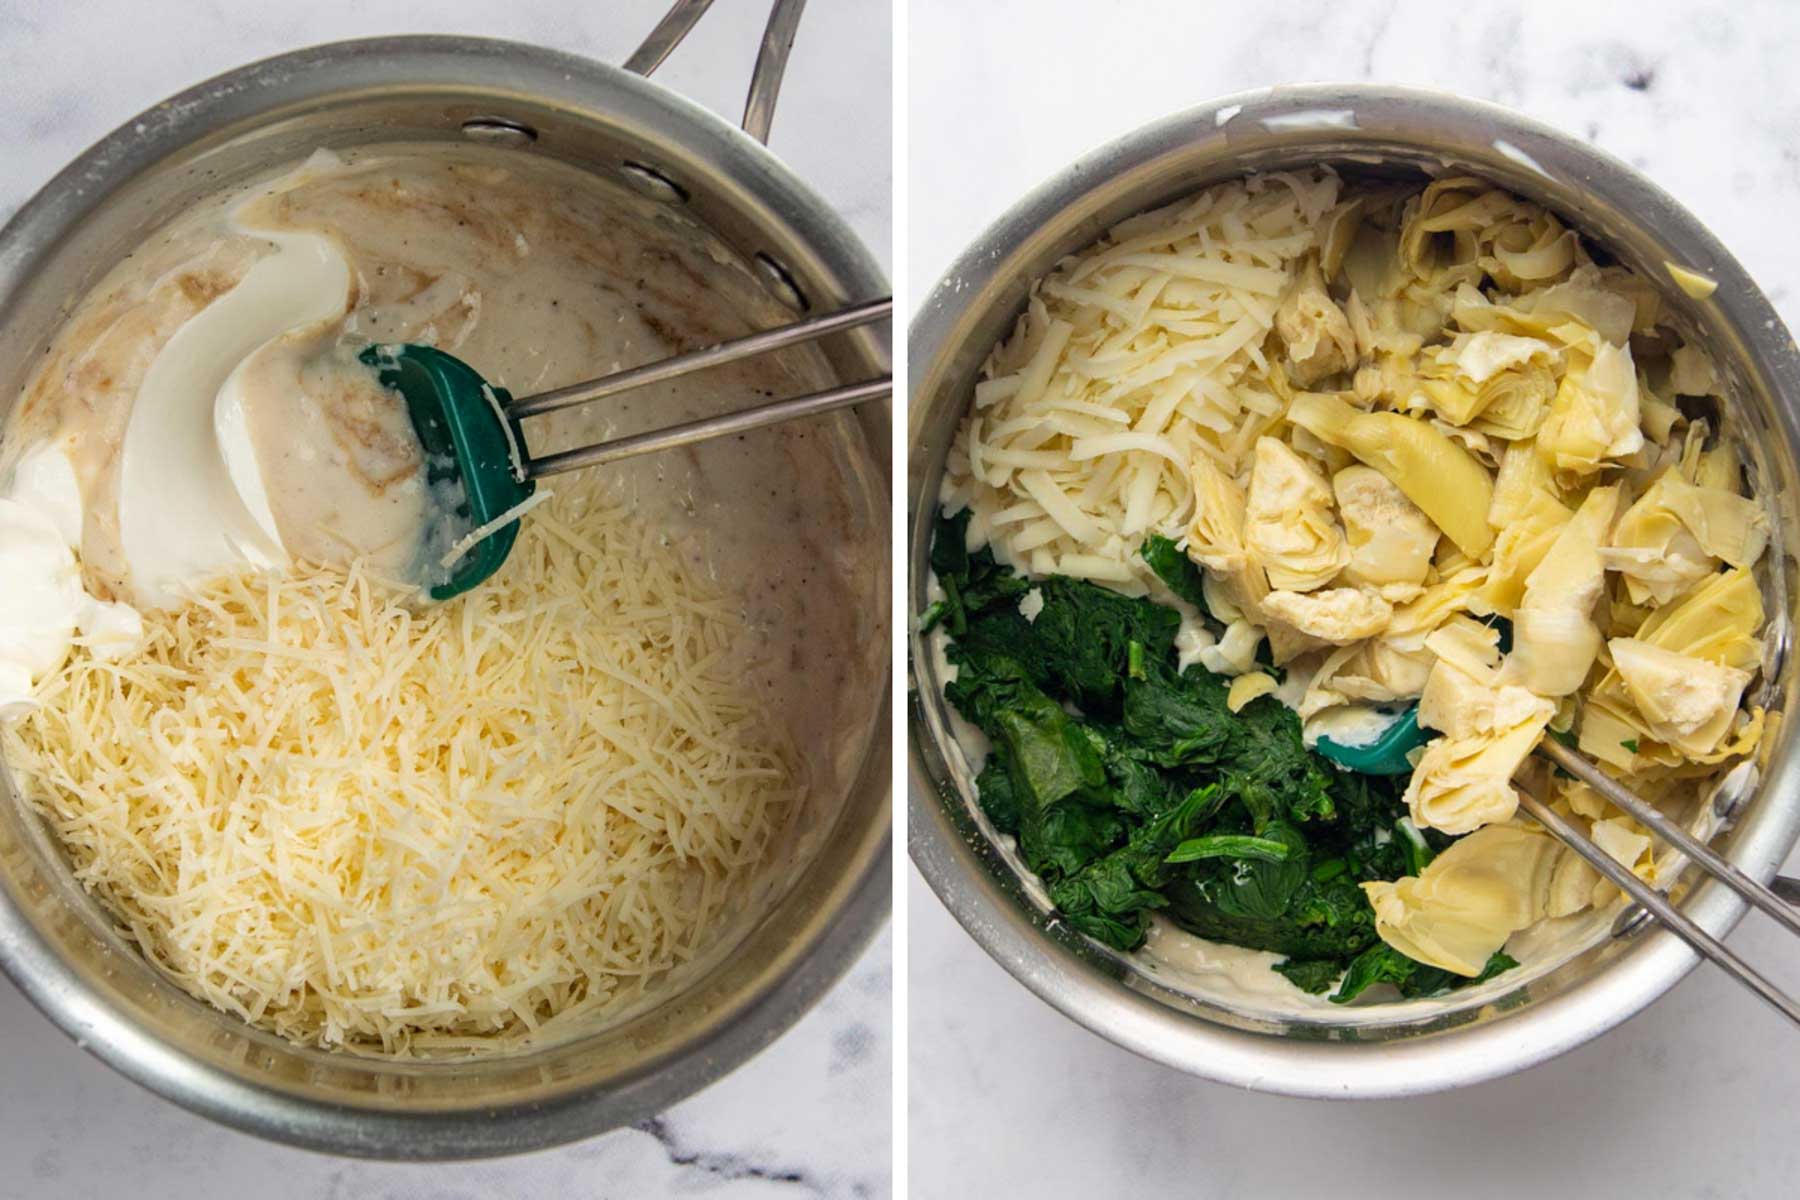 images showing how to make spinach artichoke dip